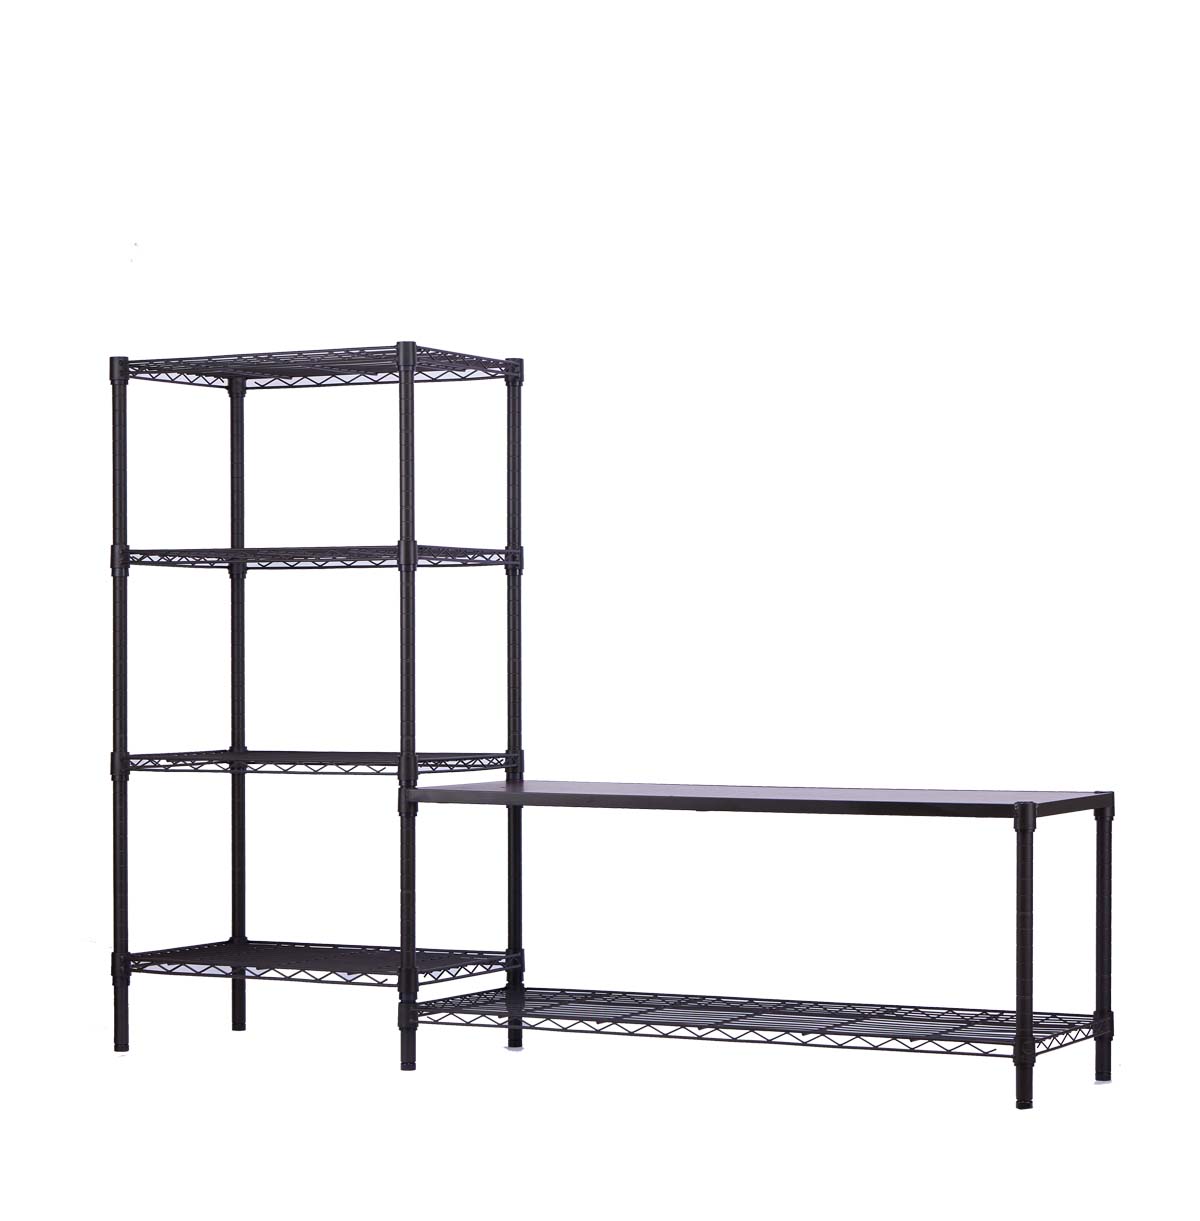 6-Tier Metal TV Stand For 42 Inch TV/ Entertainment Center / TV Console Table With Open Storage Shelves For Living Room / Bedroom